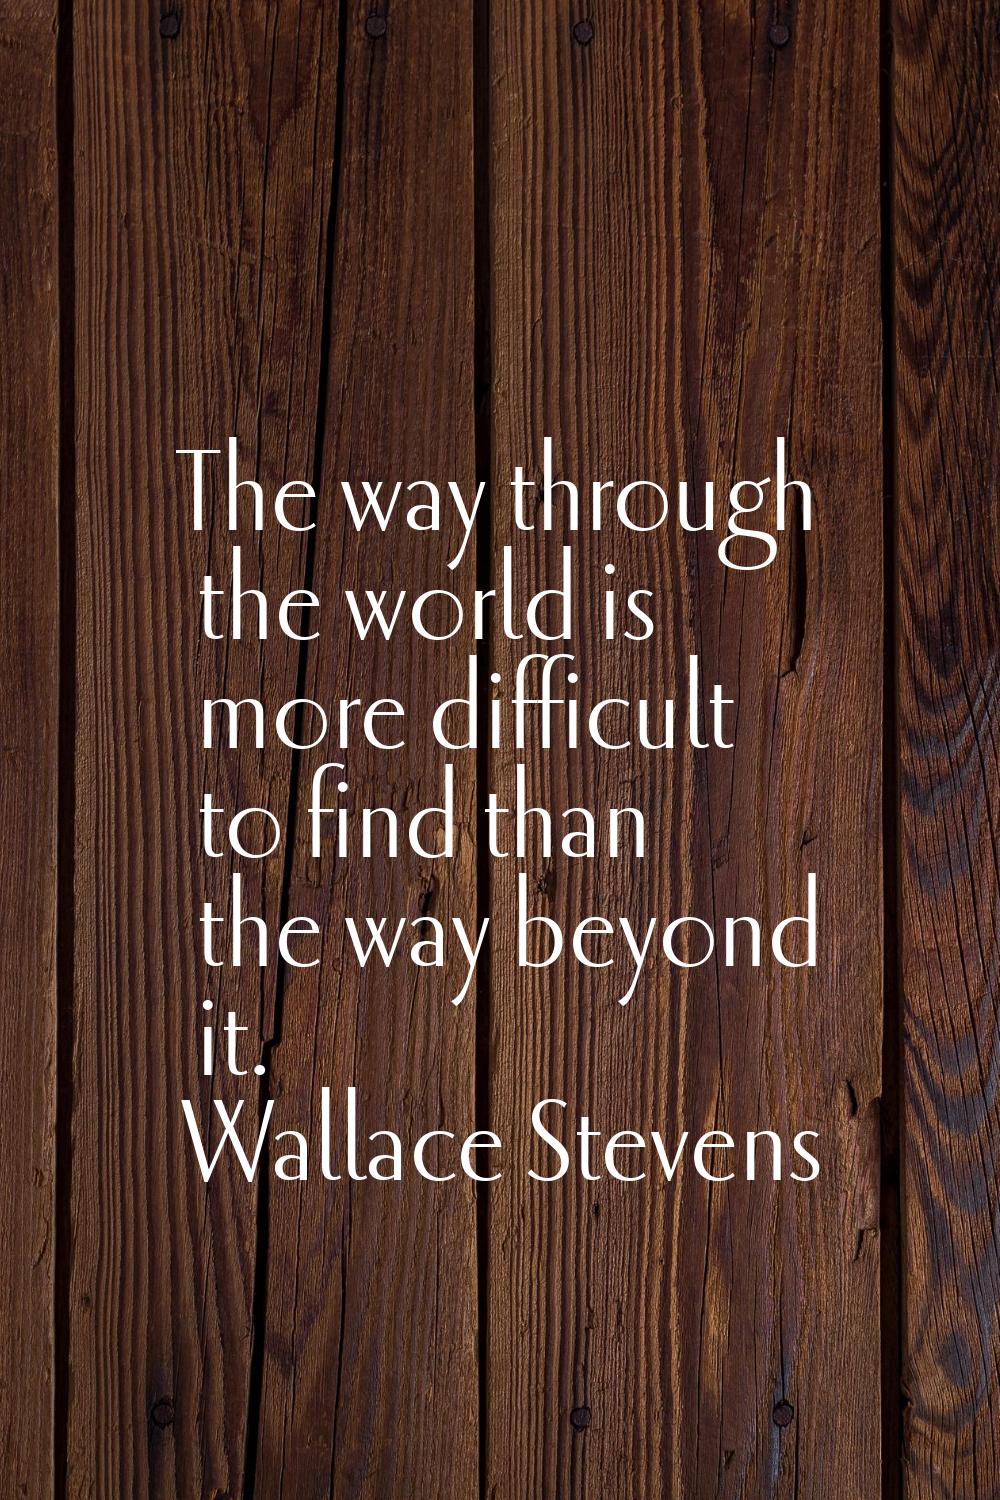 The way through the world is more difficult to find than the way beyond it.